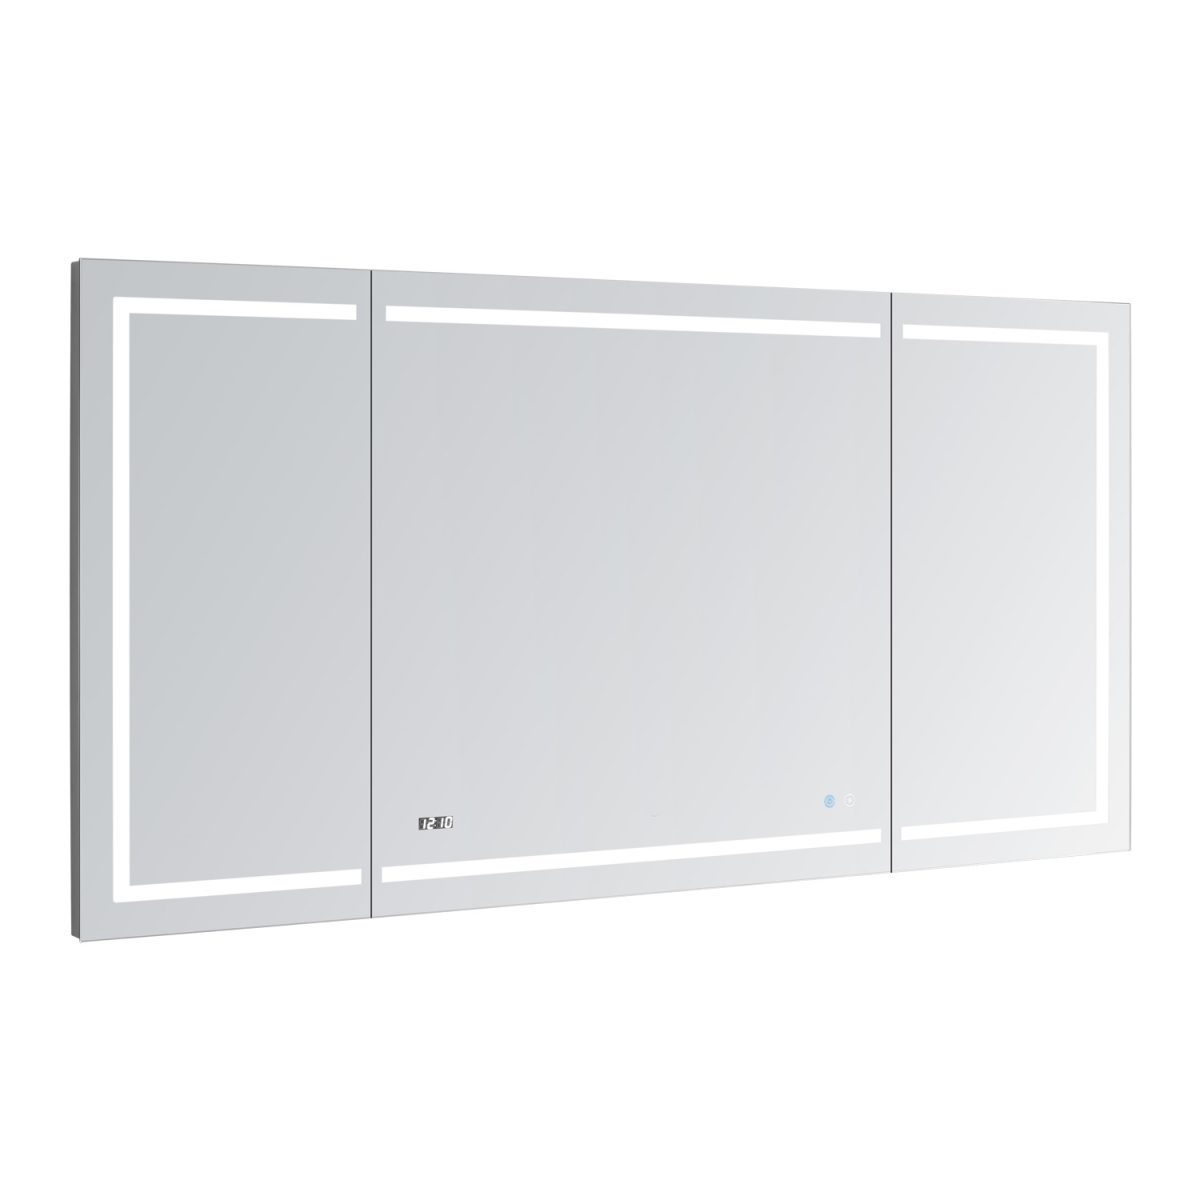 AQUADOM Signature Royale 60 inches x 30 inches LED Lighted Mirror Glass Medicine Cabinet for Bathroom